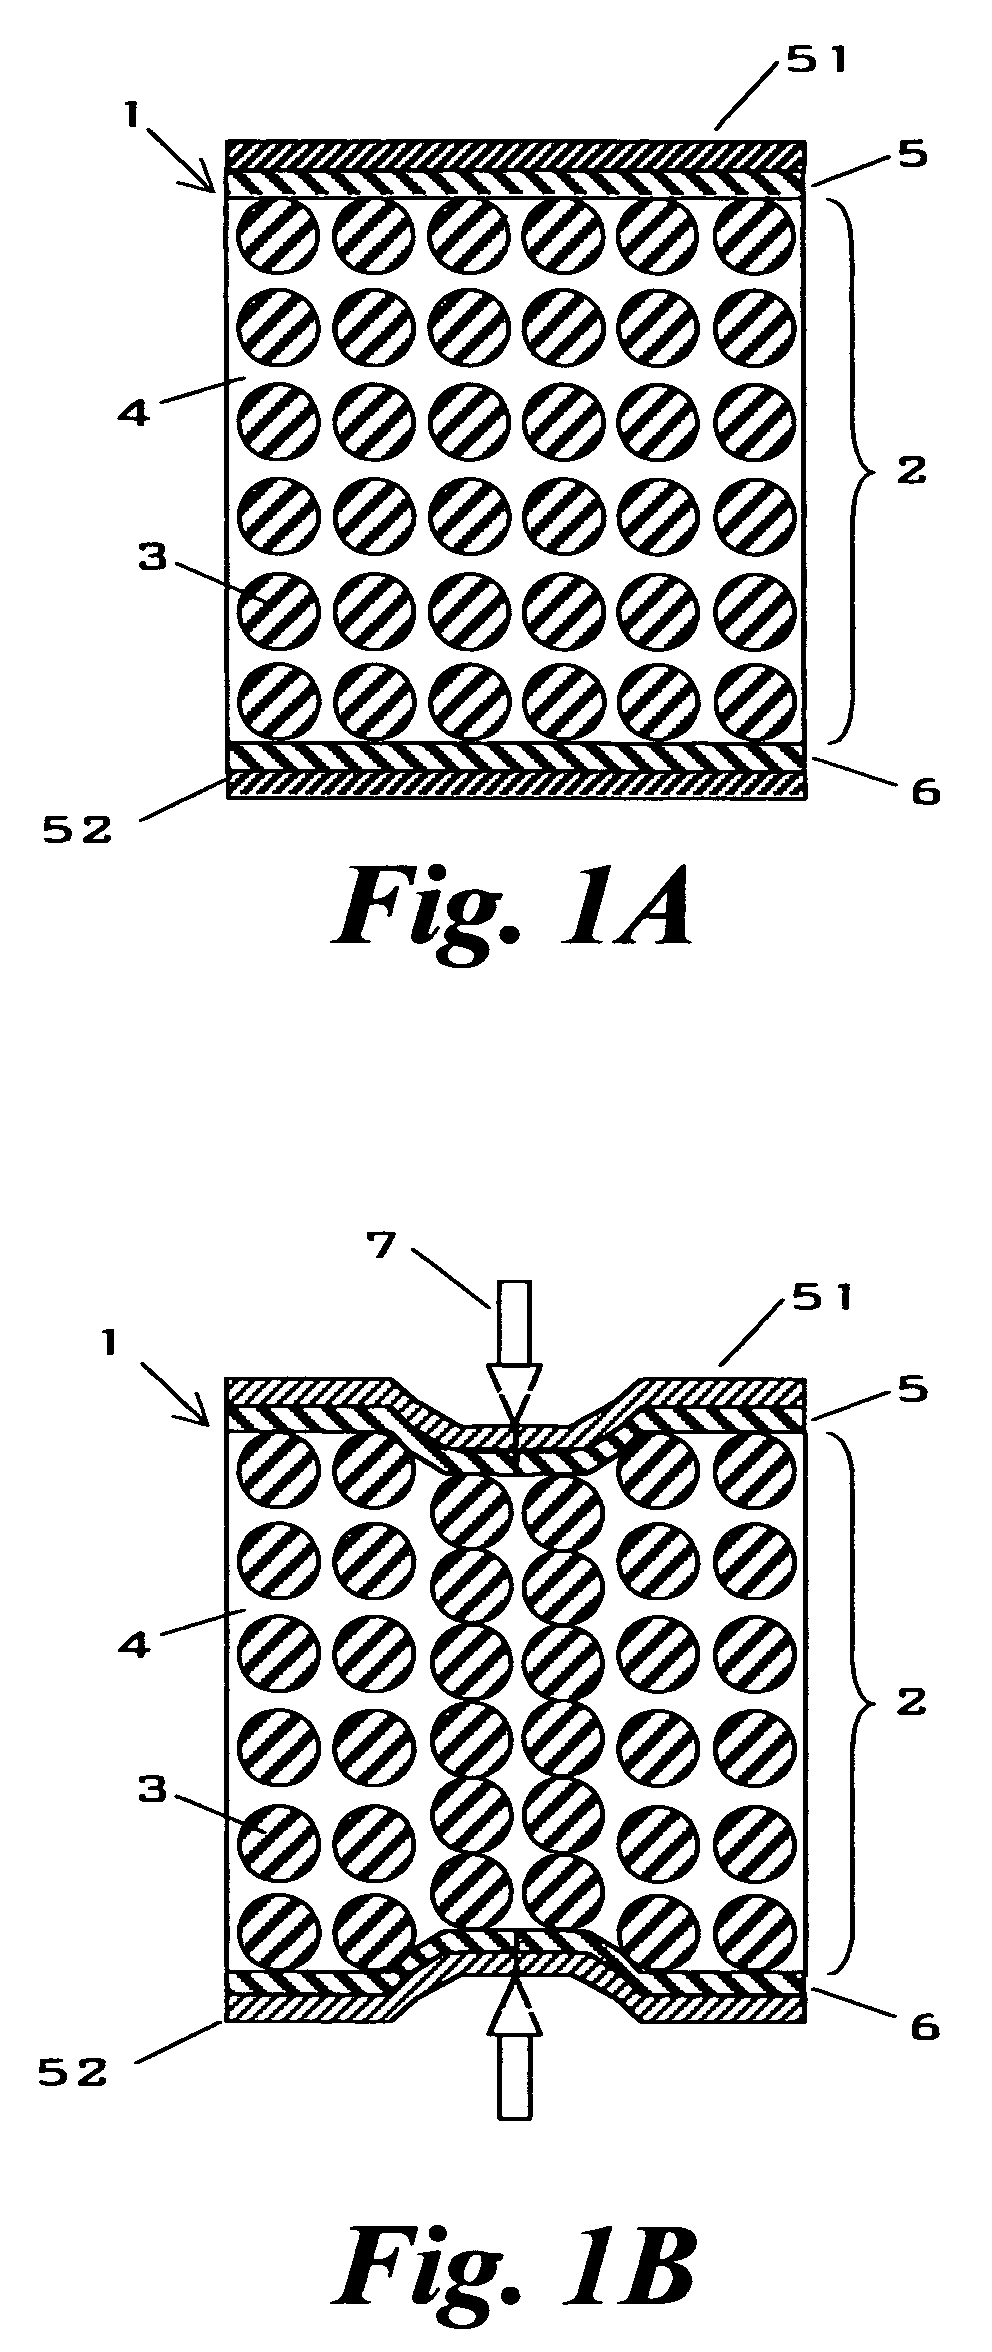 High-sensitivity pressure conduction sensor for localized pressures and stresses